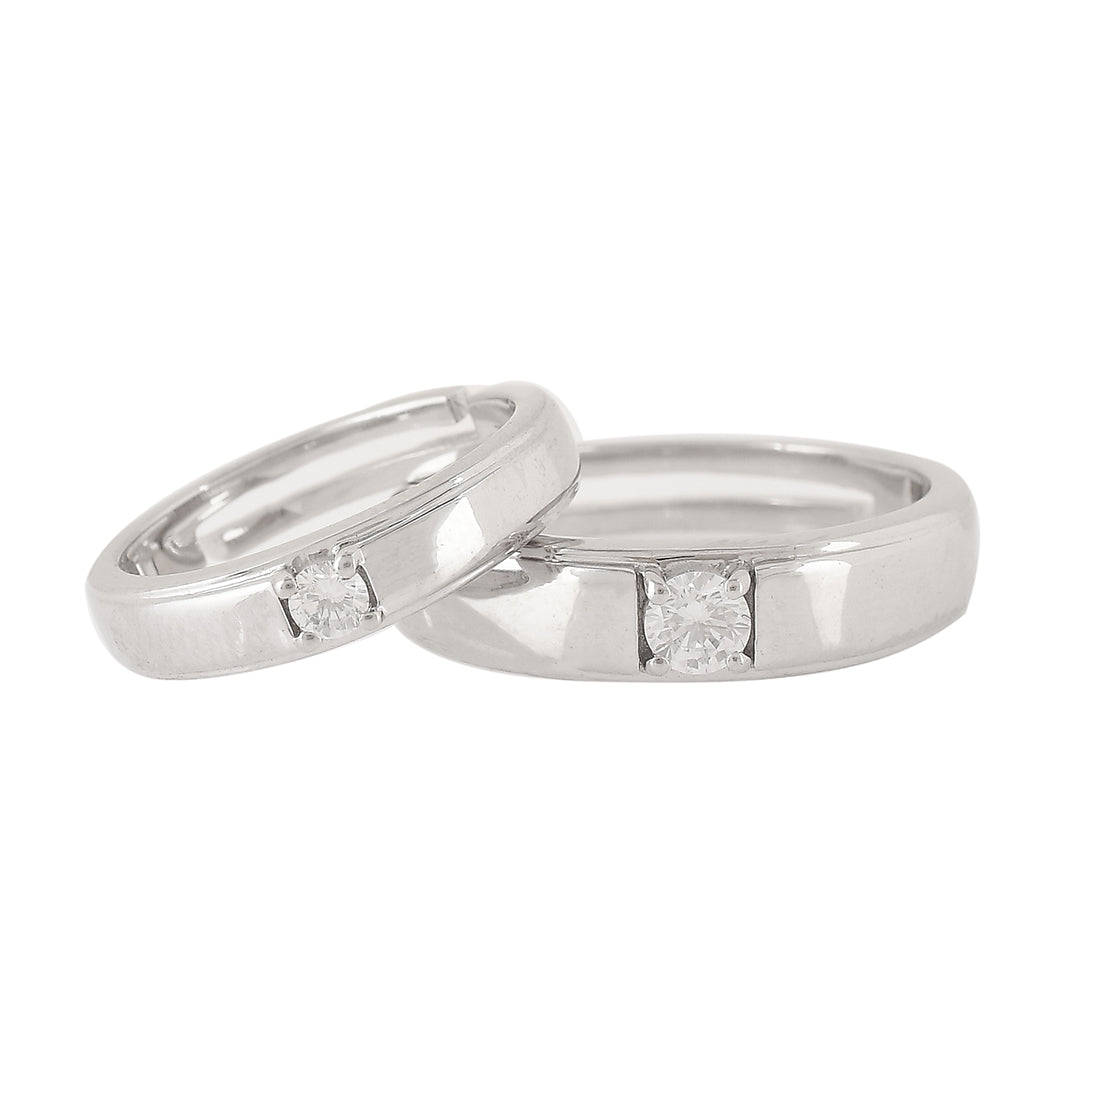 Platinum Days of Love - Wedding Bands Collection - Couple Rings